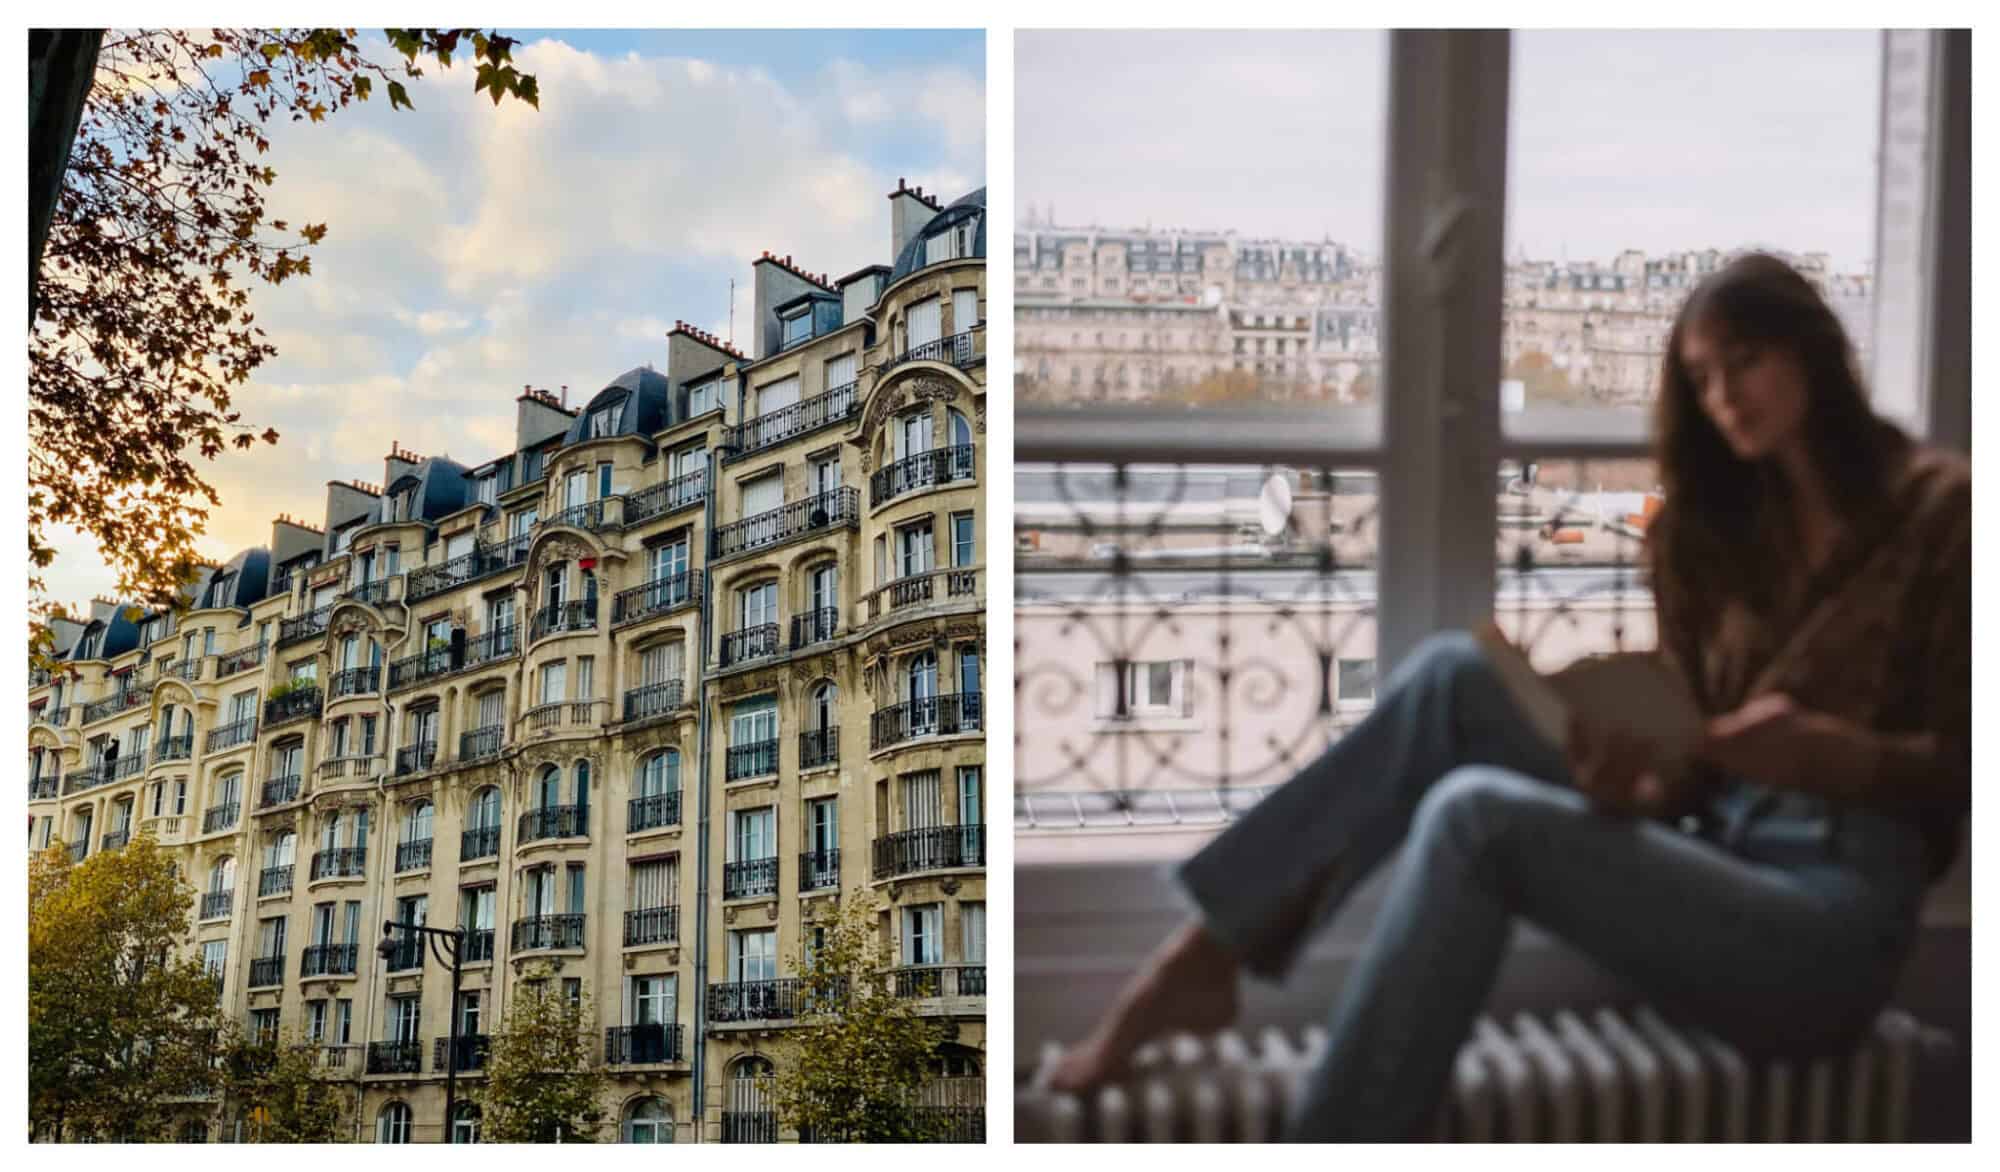 Top: A view of Paris' iconic facades and buildings from a rooftop view at sunset.
Above: Left: Looking up from street view, this photo shows Paris's beautiful building facades in the daylight. There are silver clouds in the sky and green leaves on the trees, conveying the warm environment of summer and fall. Right; A woman that is blurred, wearing blue jeans and a tan cardigan, sits on a radiator in front of a window overlooking Paris, reading a book.